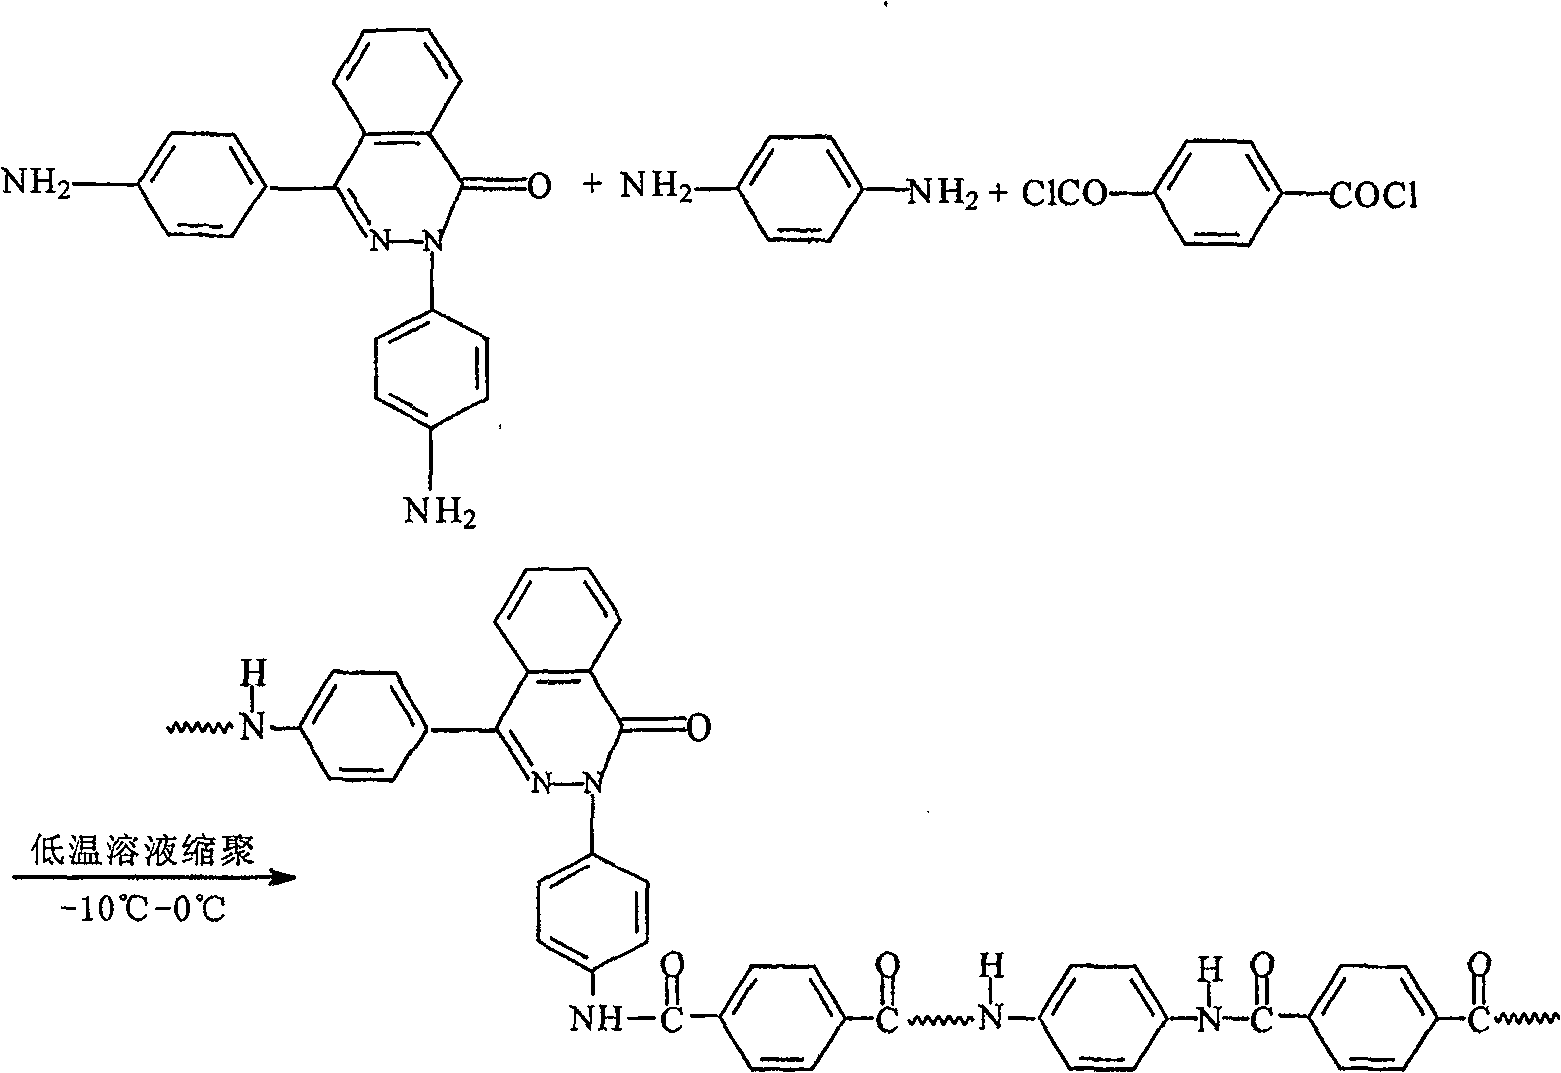 PPTA containing 2,4 di (4-amino phenyl)-2,3-diaza naphthalene-1-one and preparation process thereof